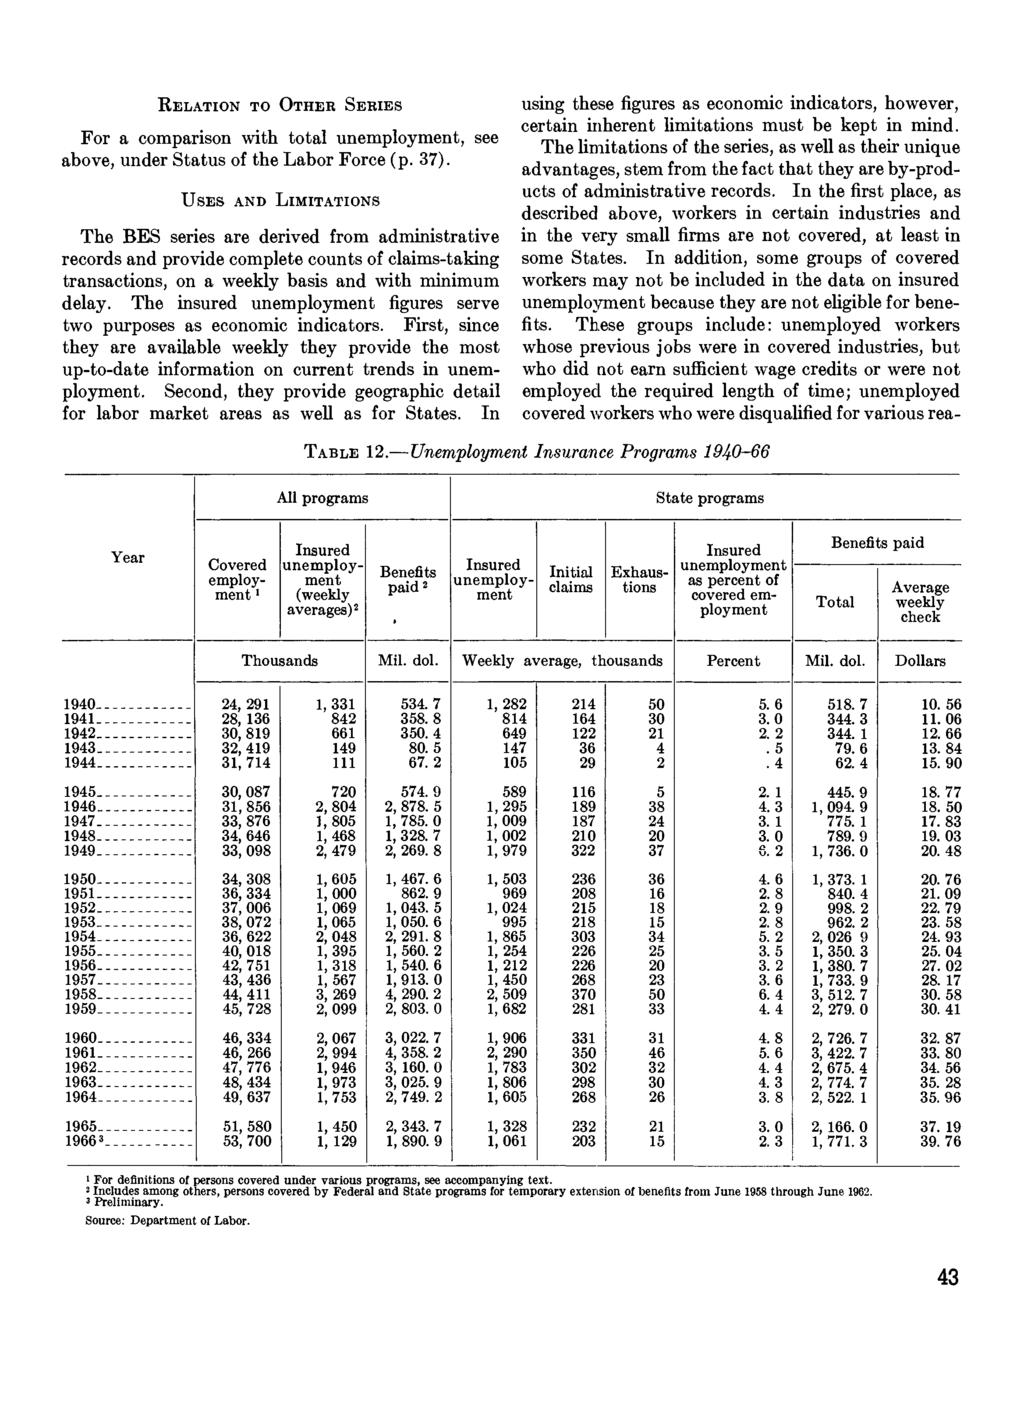 RELATION TO OTHER SERIES For a comparison with total unemployment, see above, under Status of the Labor Force (p. 37).